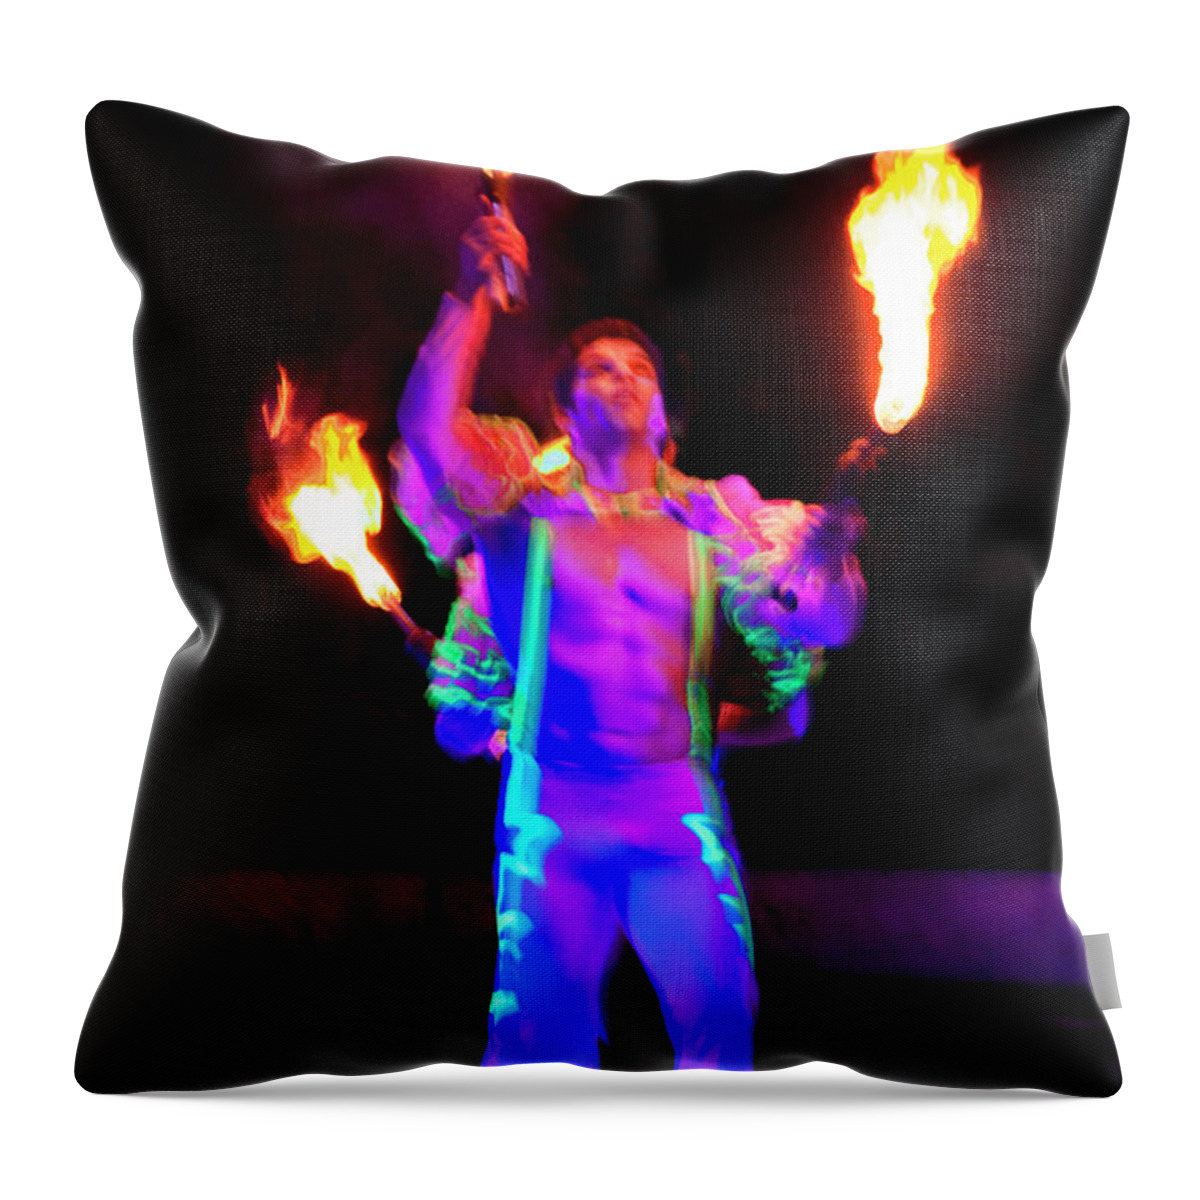 Fire Juggling Throw Pillow featuring the photograph Fire Juggler by Ron Morecraft